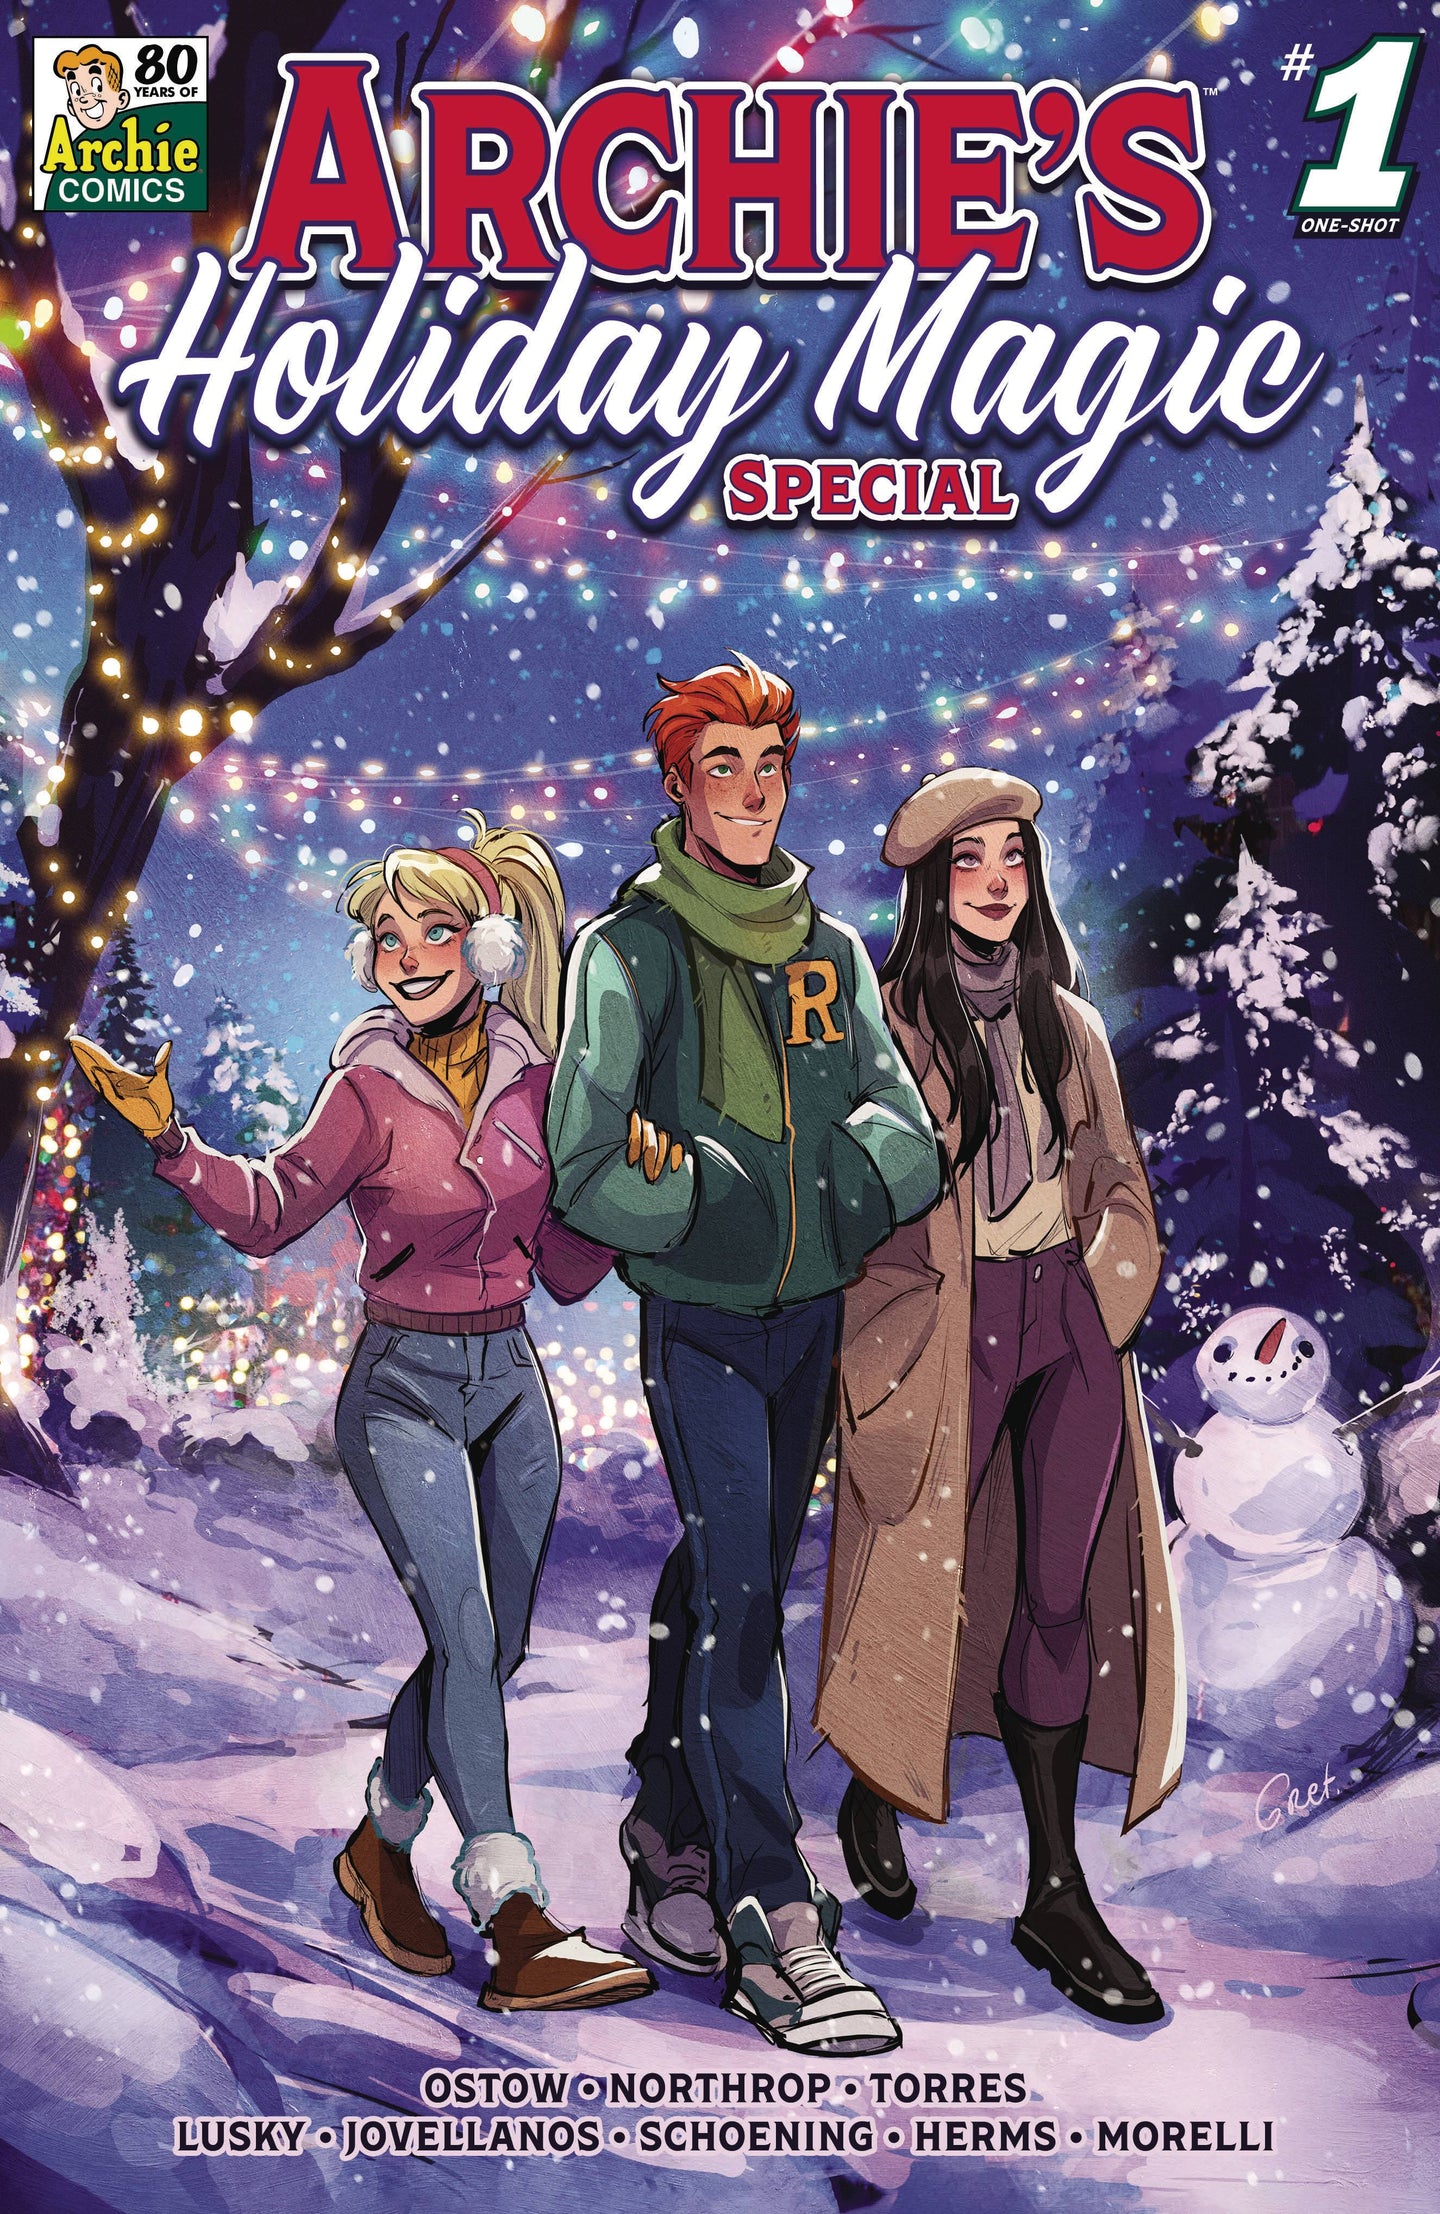 Archies Holiday Magic Special #1 (2021)